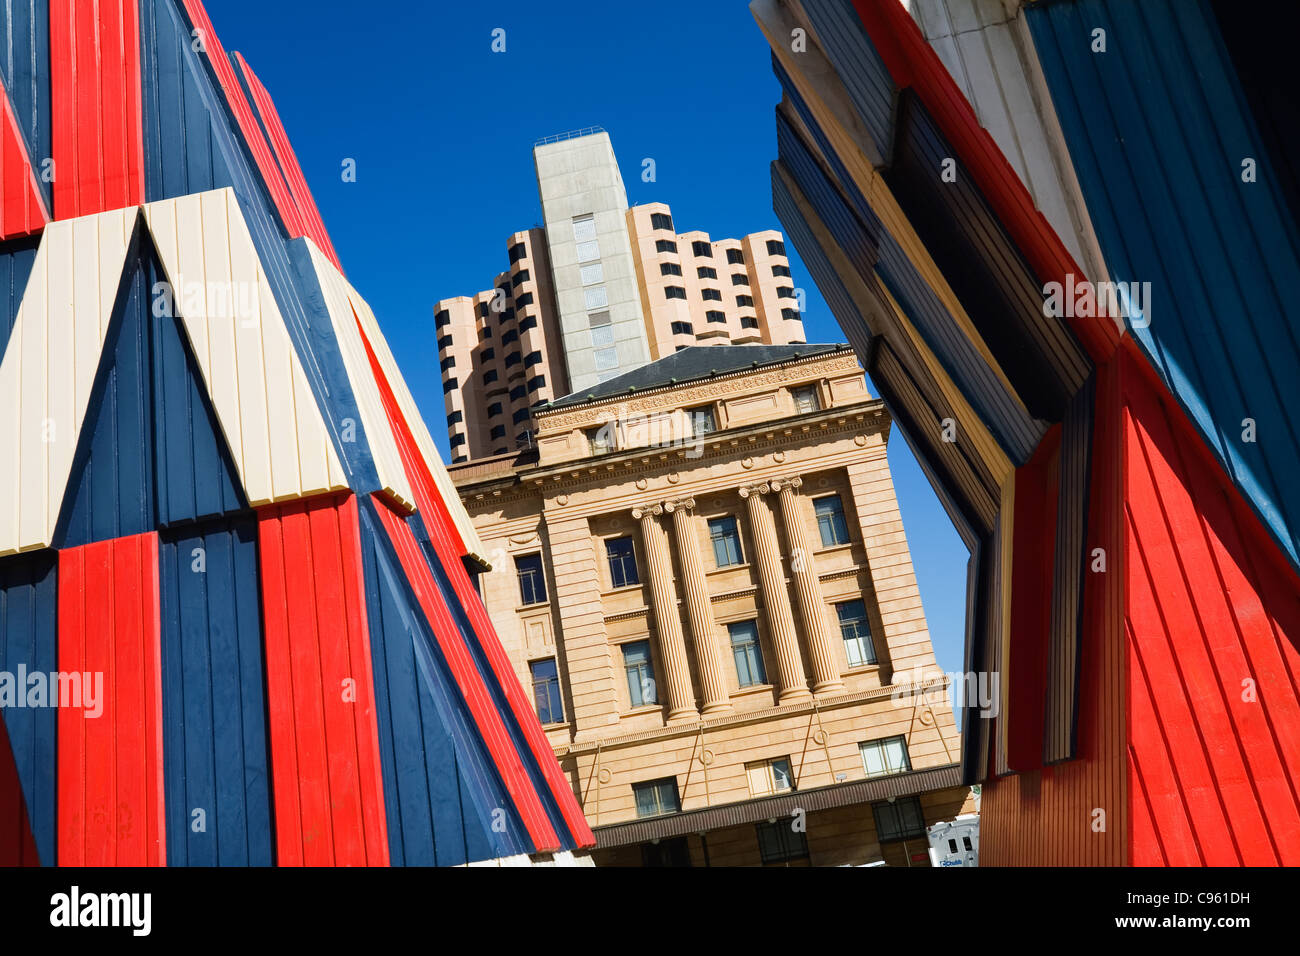 Looking through colourful sculptures of the Adelaide Festival Centre to Parliament House - Adelaide, South Australia, AUSTRALIA Stock Photo